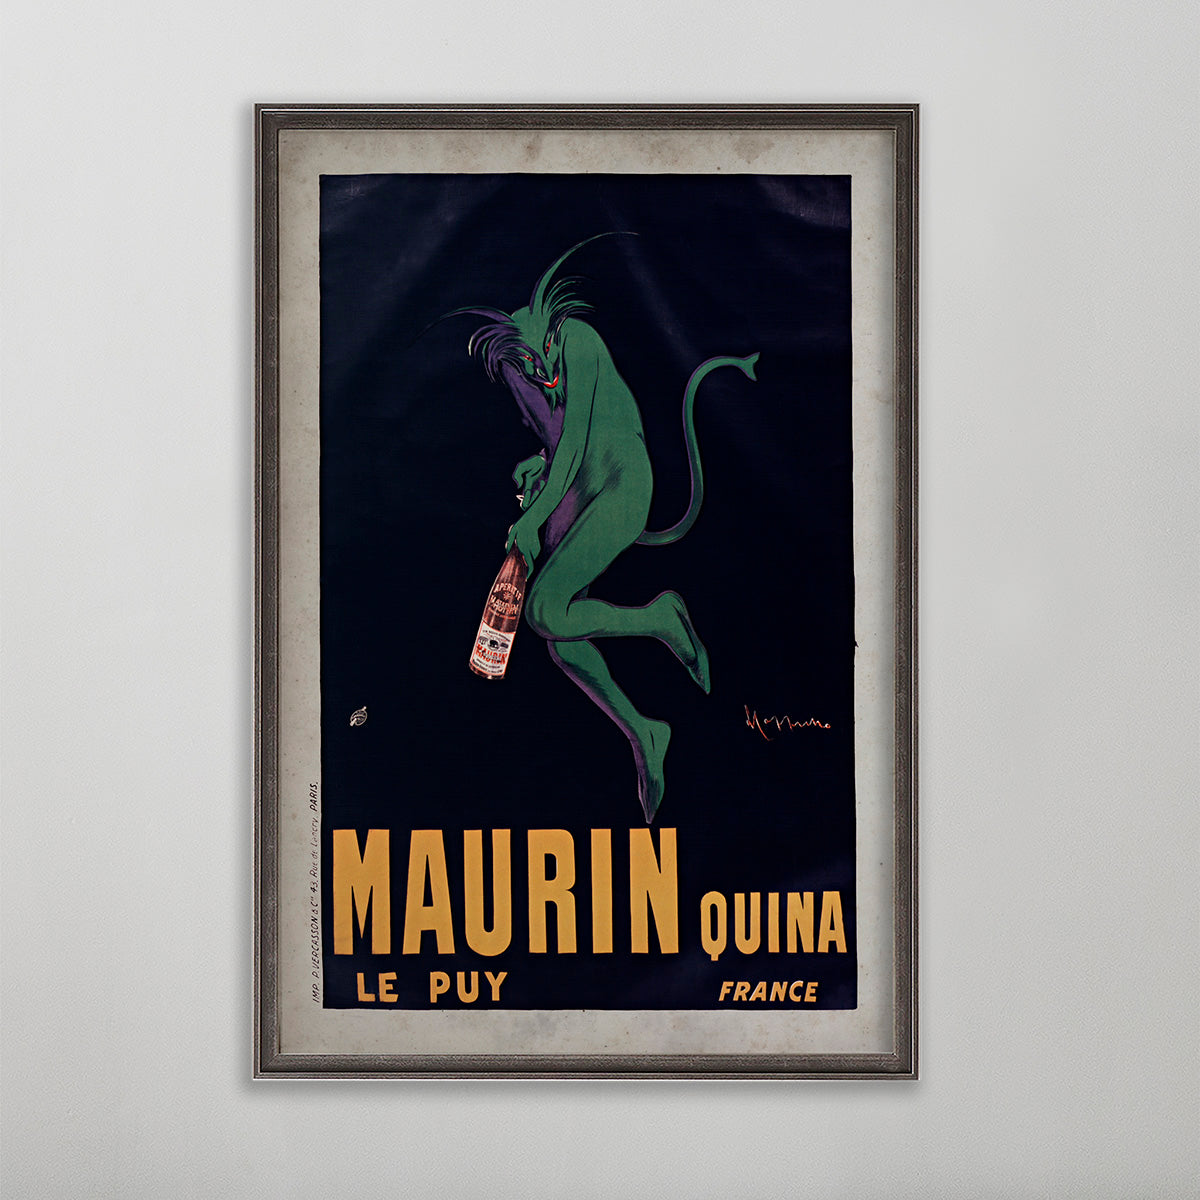 Maurin Quina Le Puy vintage poster wall art by leonetto cappiello. Green devil holding a bottle.